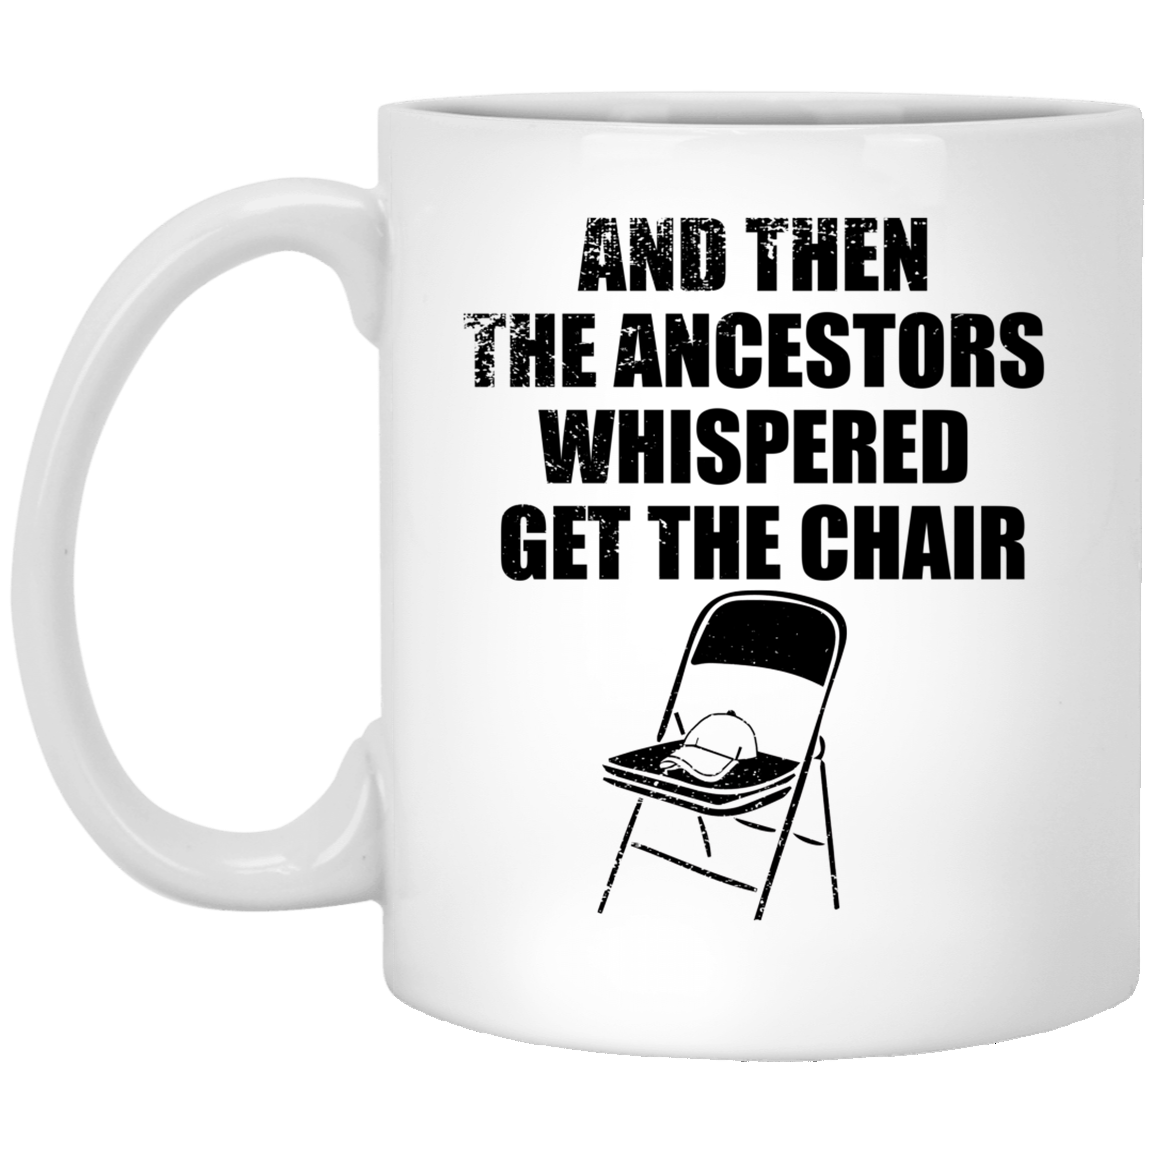 Get The Chair Mugs